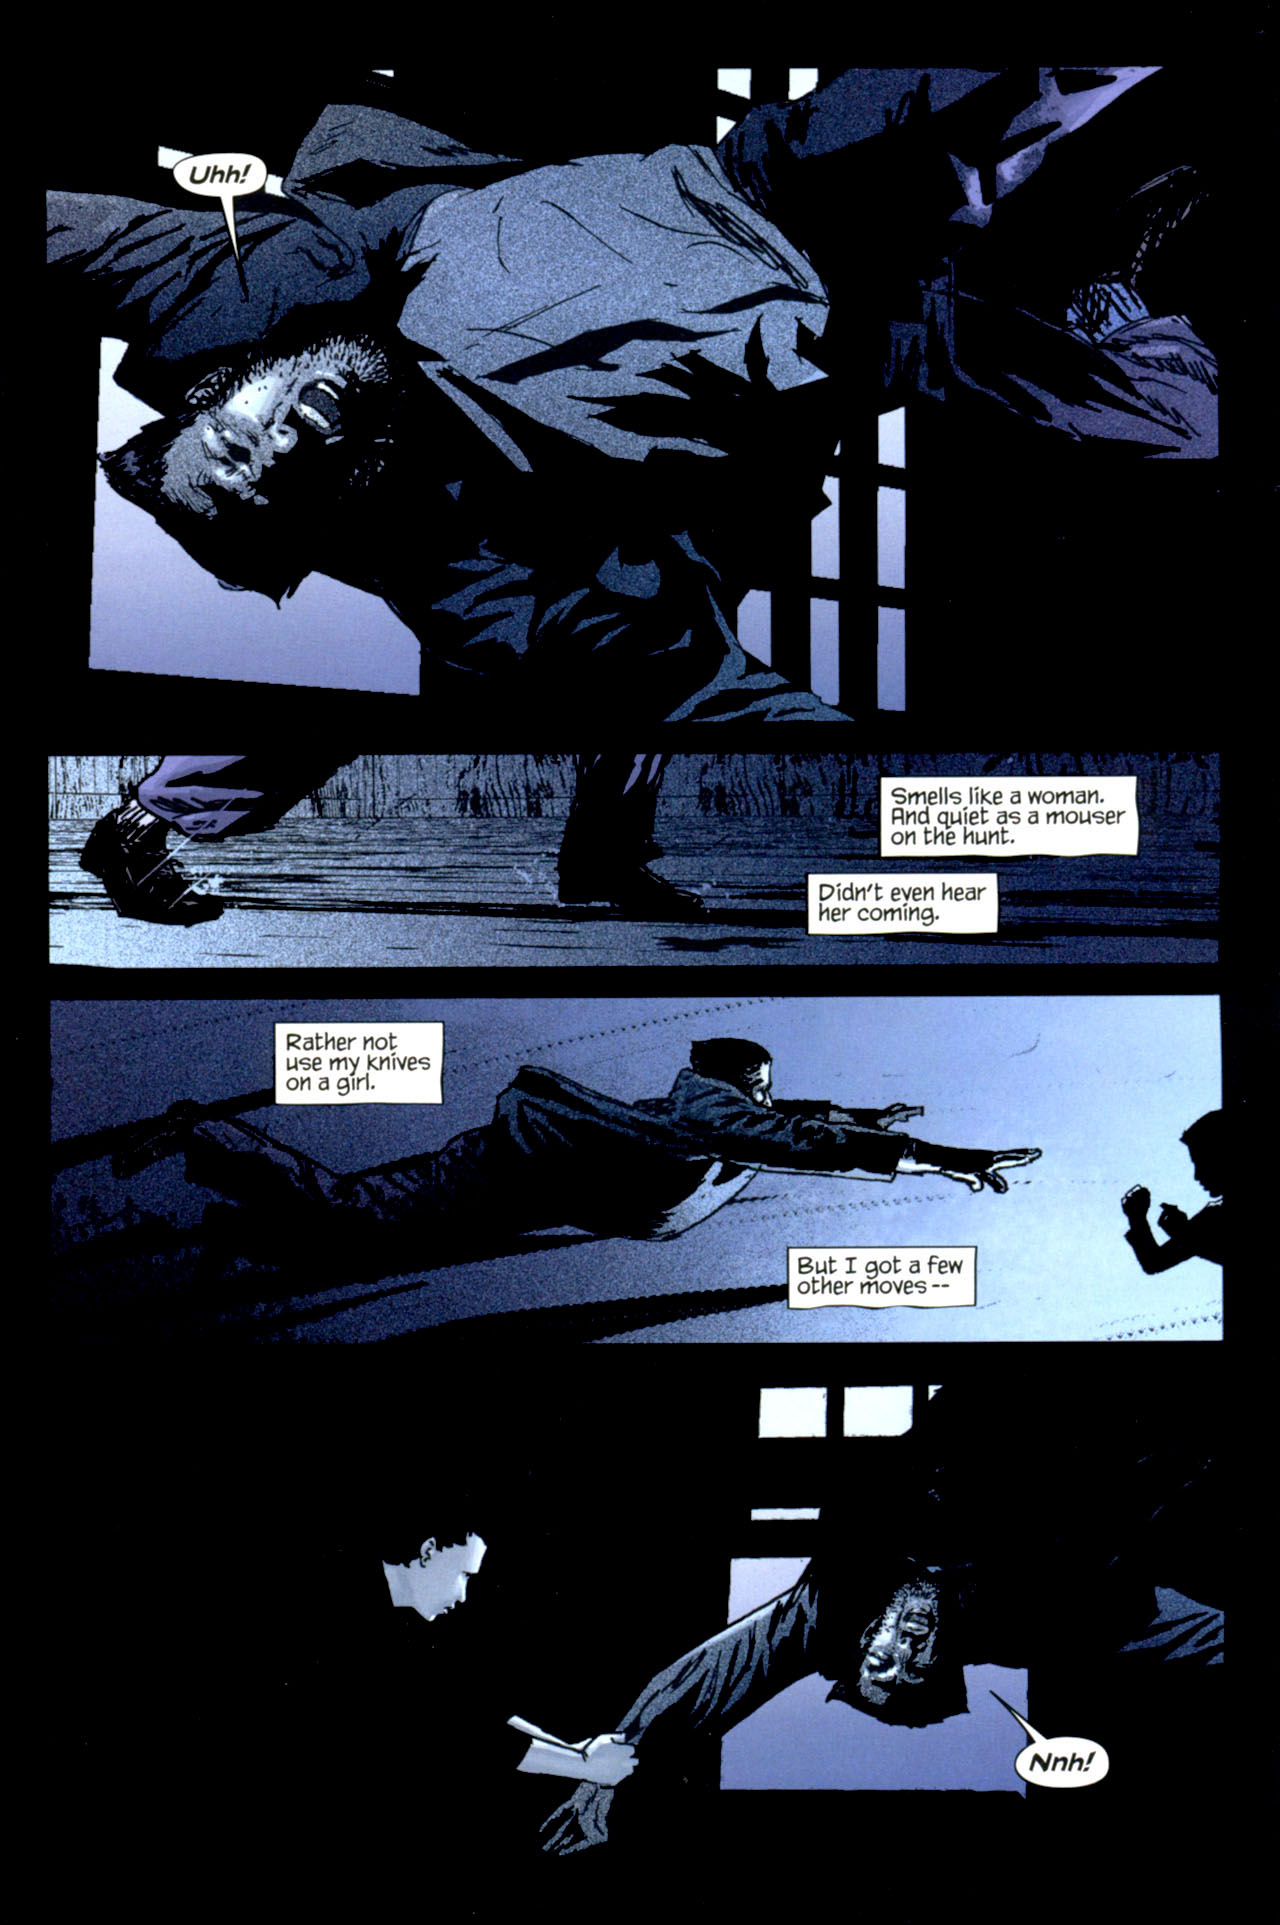 Wolverine Noir #2 (of 4) - Alley Cats